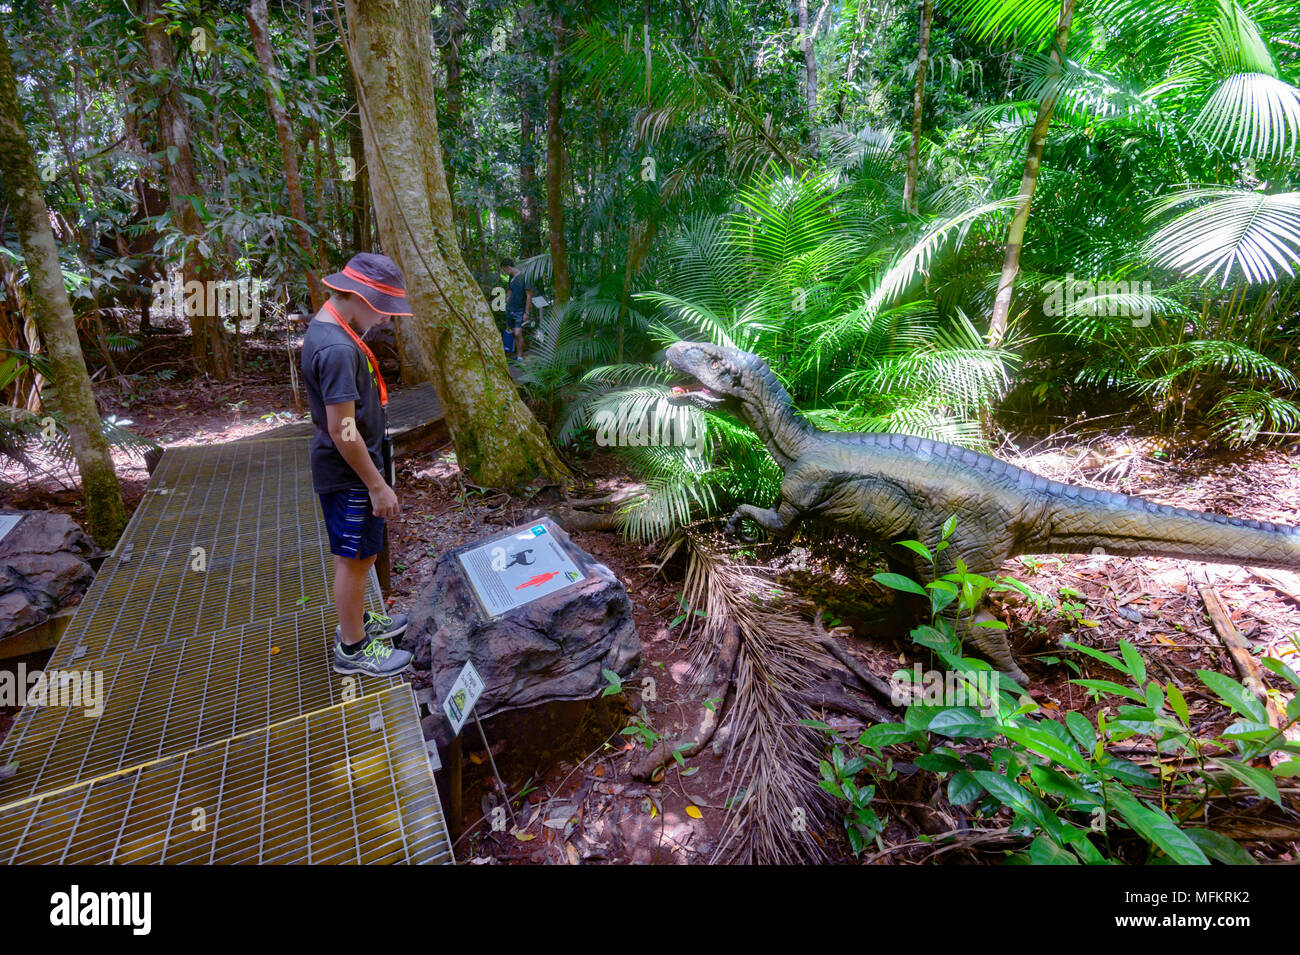 Young boy looking at a dinosaur in the Jurassic Forest, Daintree Discovery Centre, Daintree National Park, Far North Queensland, FNQ Stock Photo